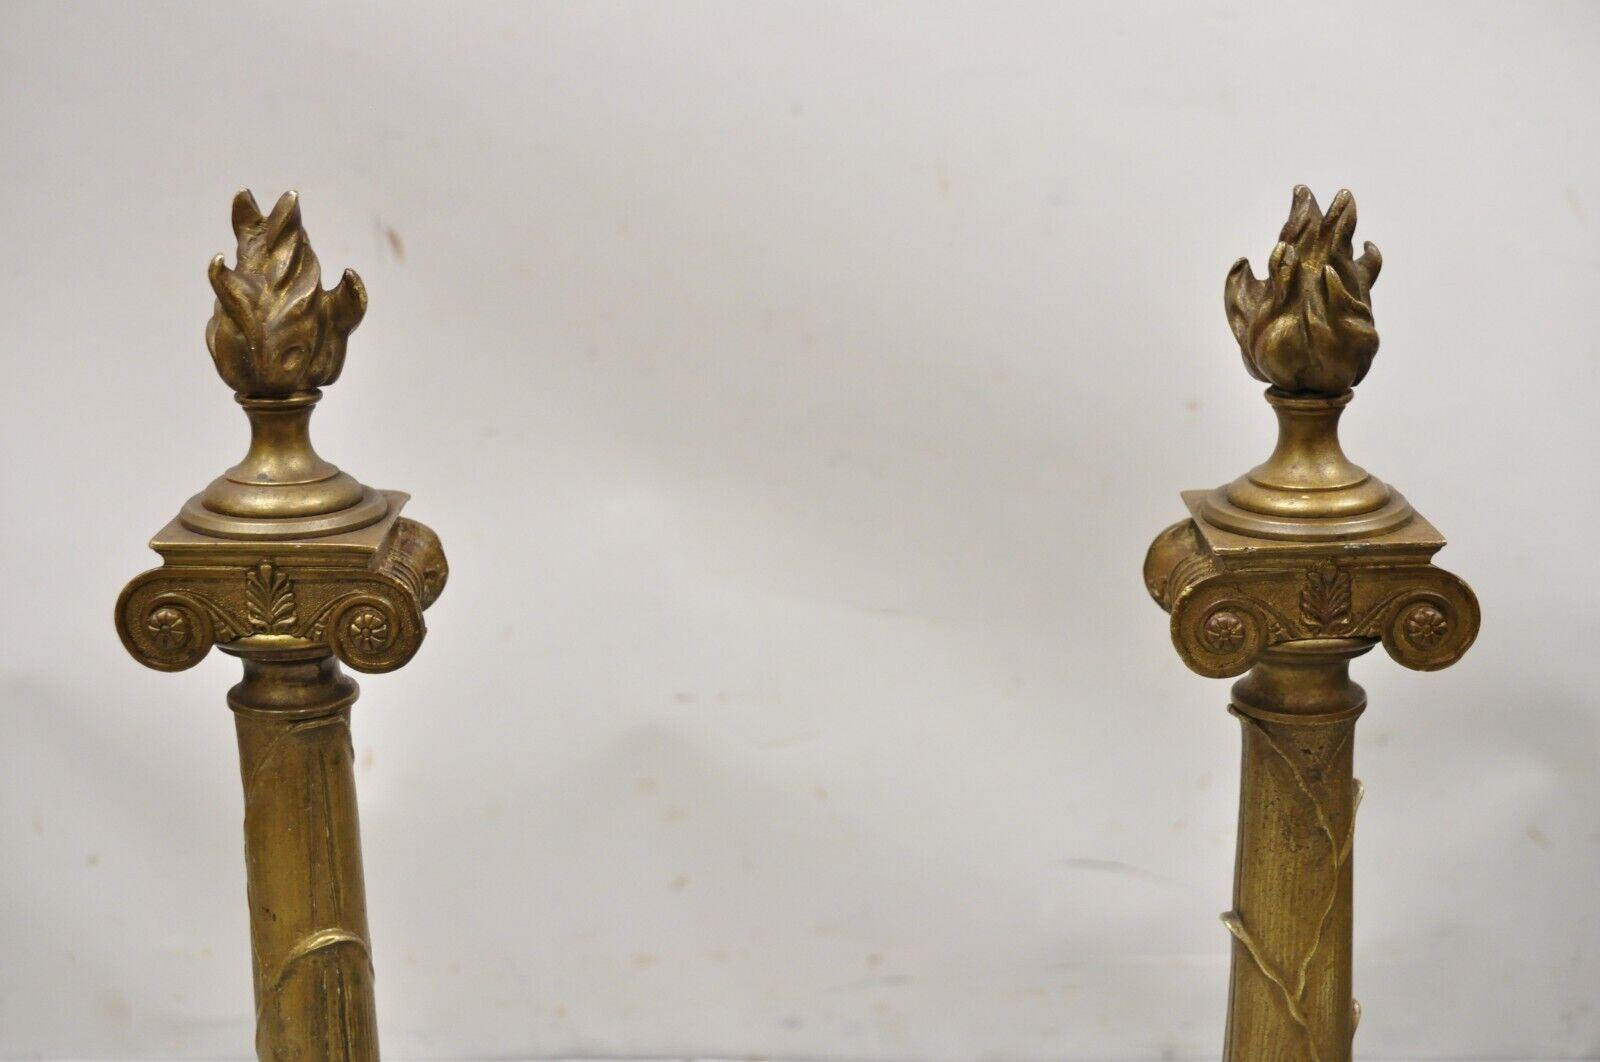 Cast Antique French Empire Renaissance Style Torch Flame Finial Bronze Andirons Pair